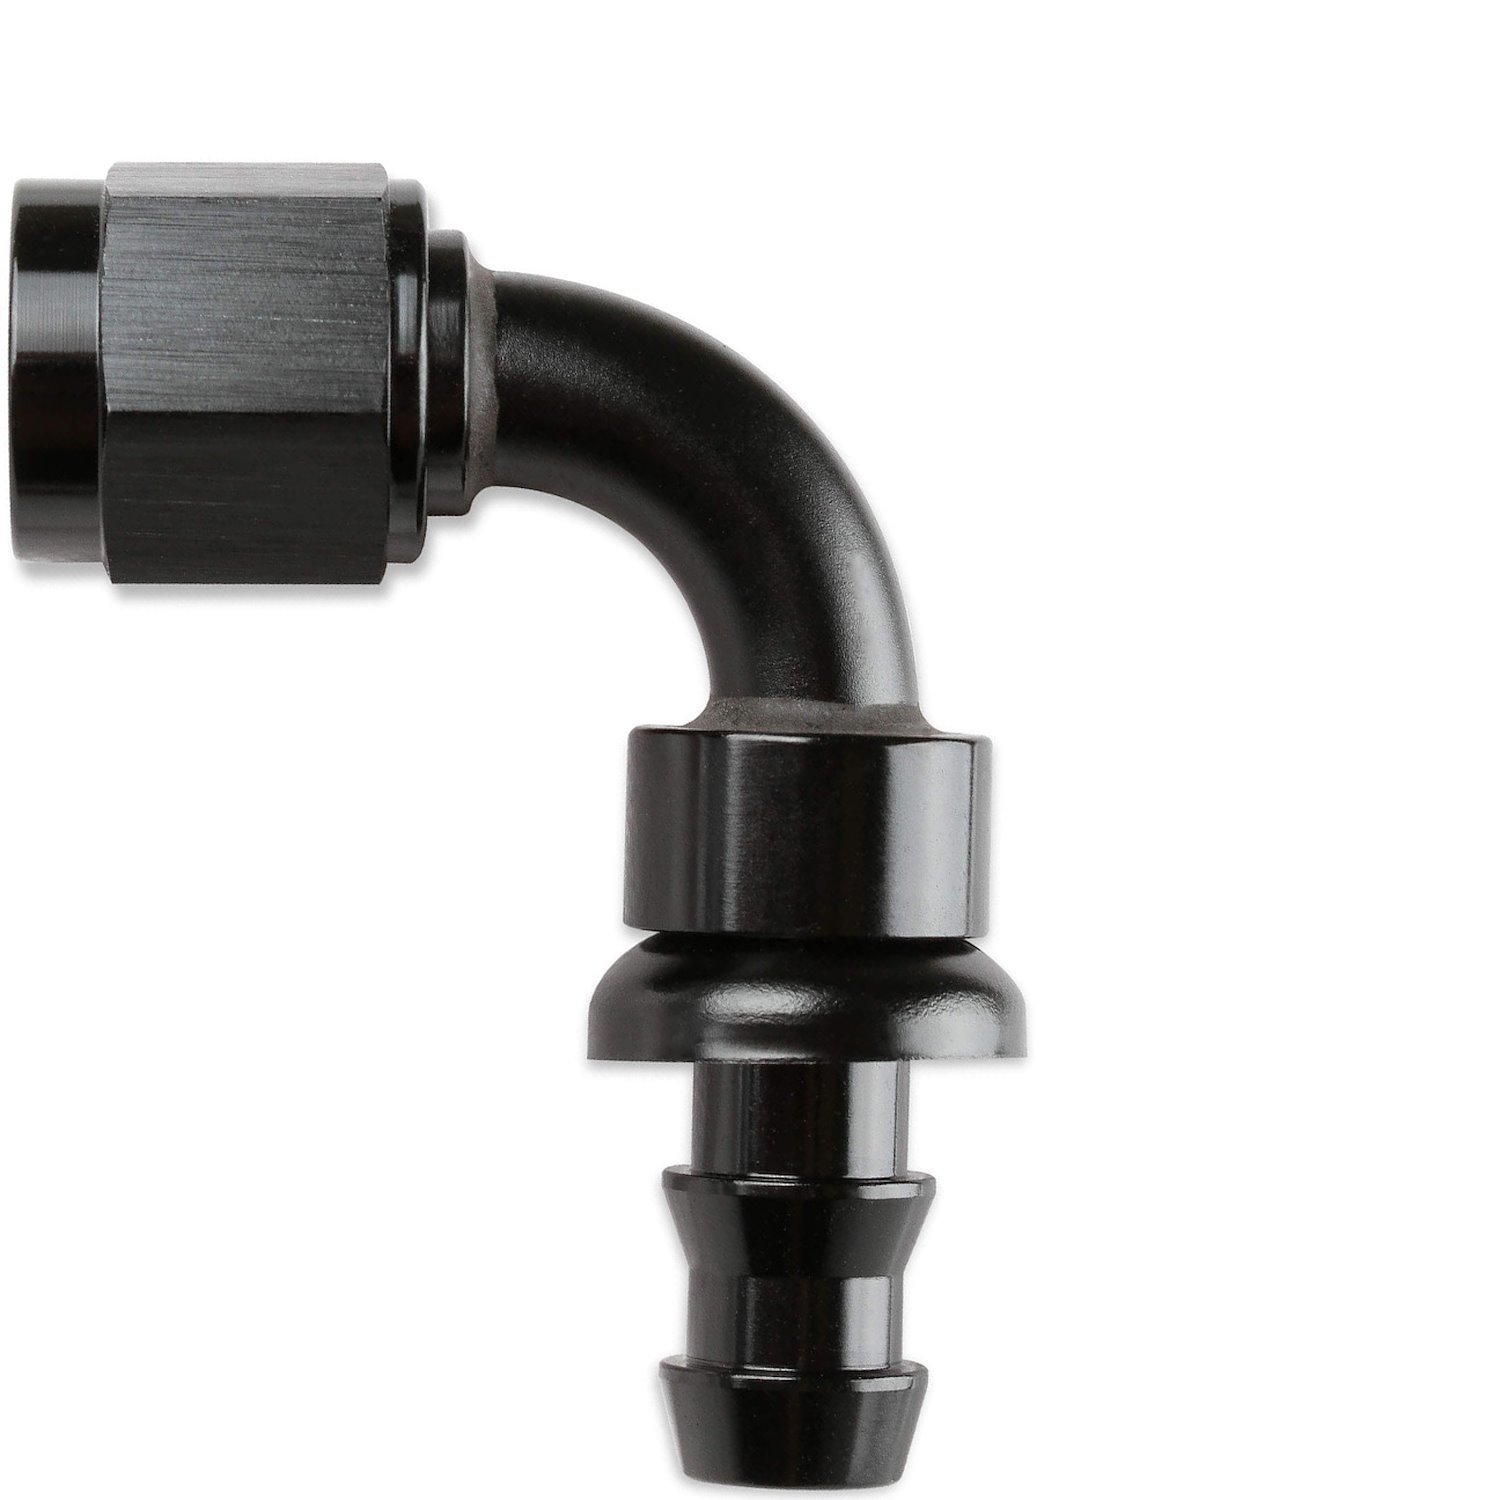 Push-On Hose End Fitting